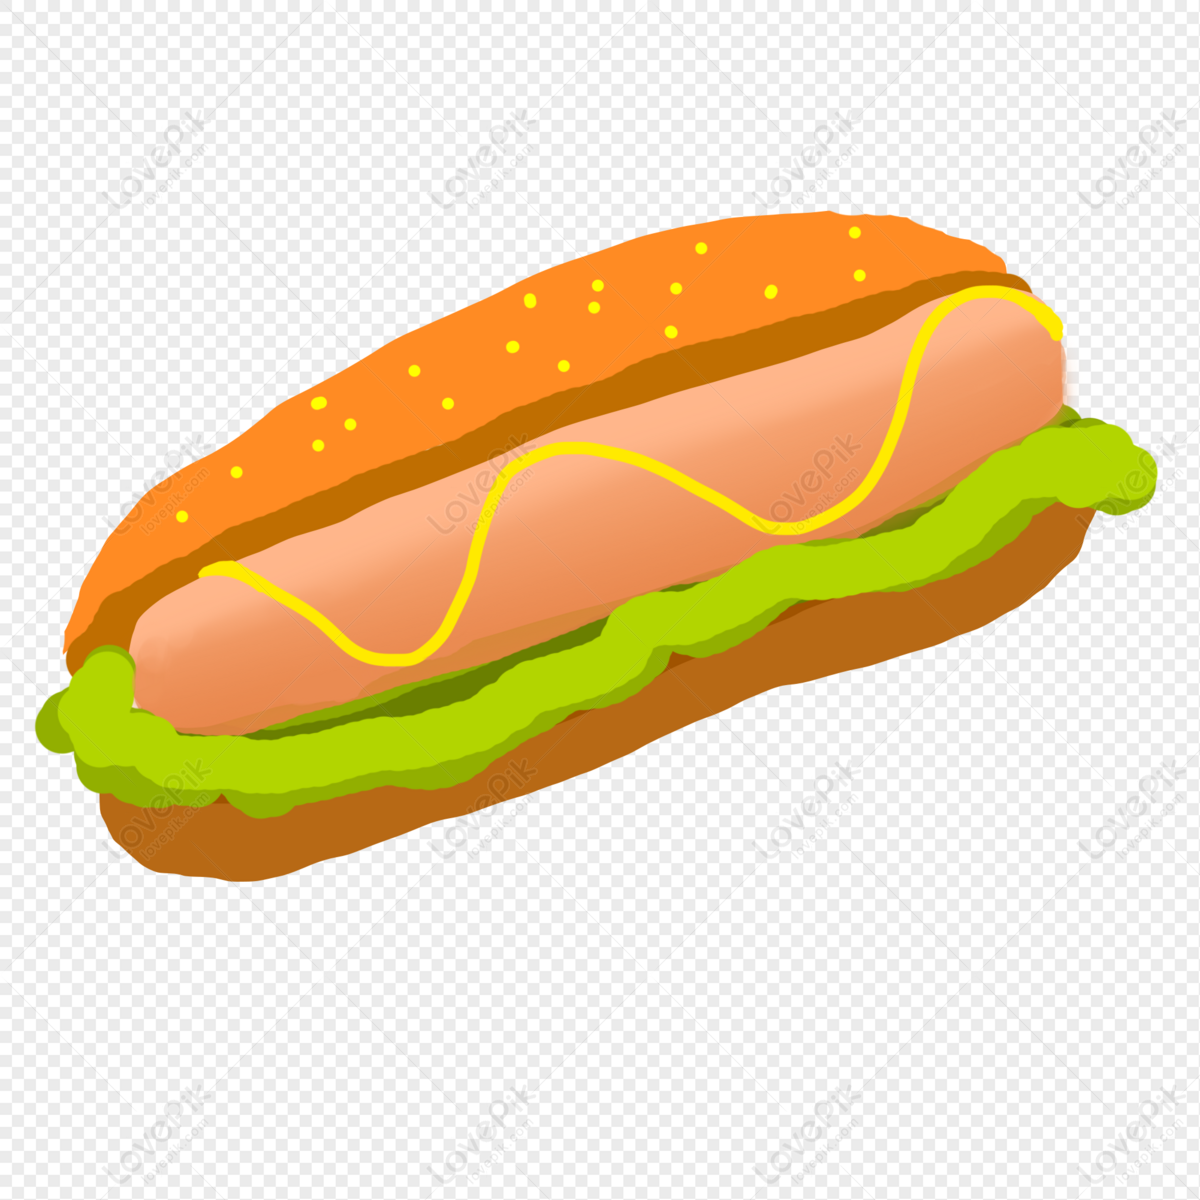 Delicious Sausage Hot Dog Png Hd Transparent Image And Clipart Image For  Free Download - Lovepik | 401226844